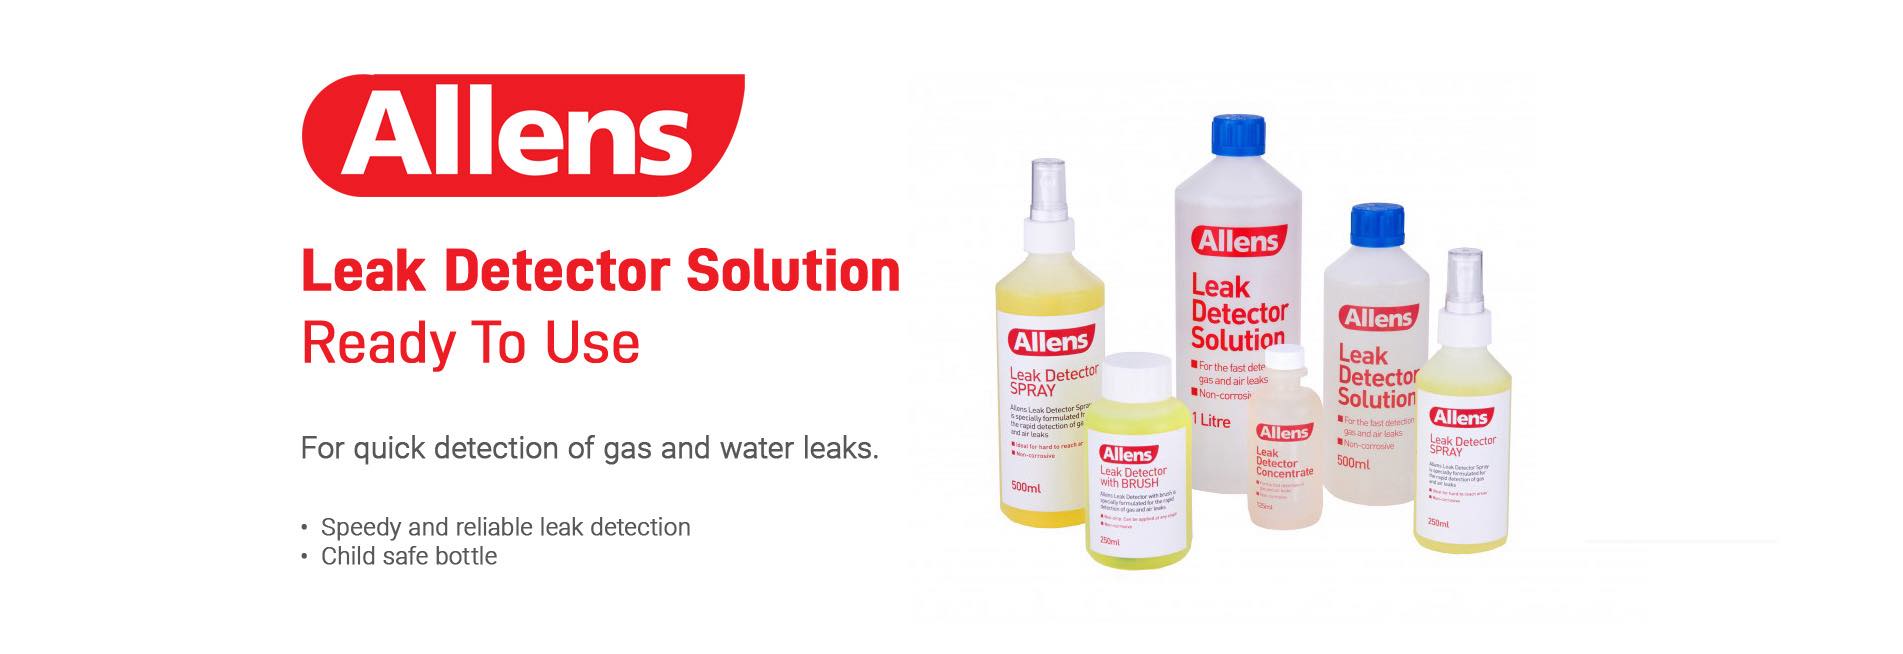 Allens leak Detector Fluid Ready to use